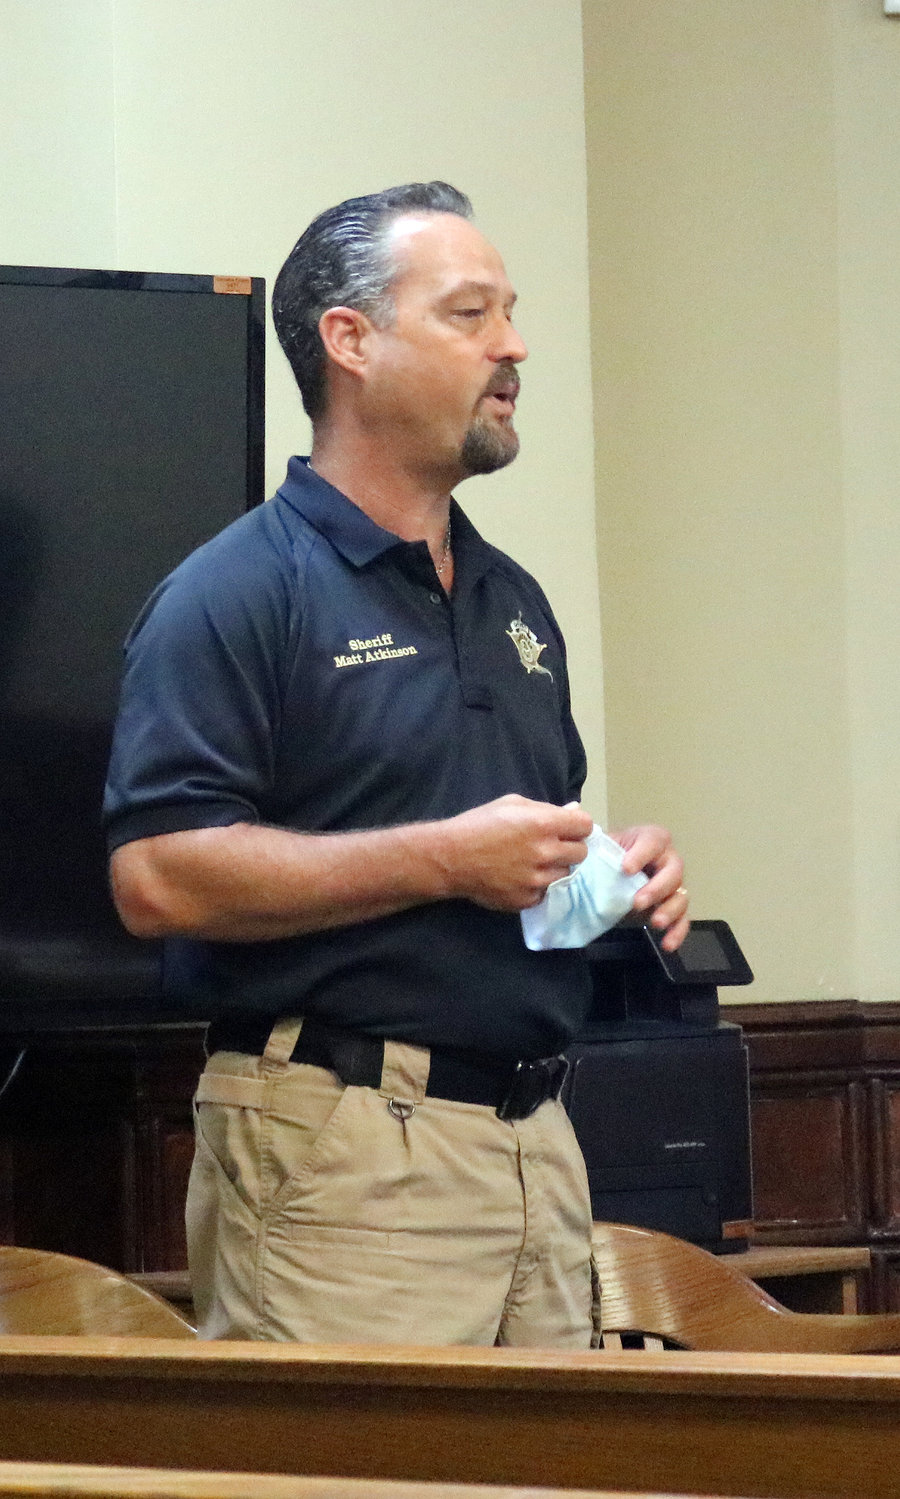 Sheriff Matthew J. Atkinson gives a report Monday to the Gonzales County Commissioners Court. He talked about the handling of events surrounding Friday’s Juneteenth celebration. “It goes to show what we can do when we cooperate. It’s a lesson on how to do and handle events like that,” he said.